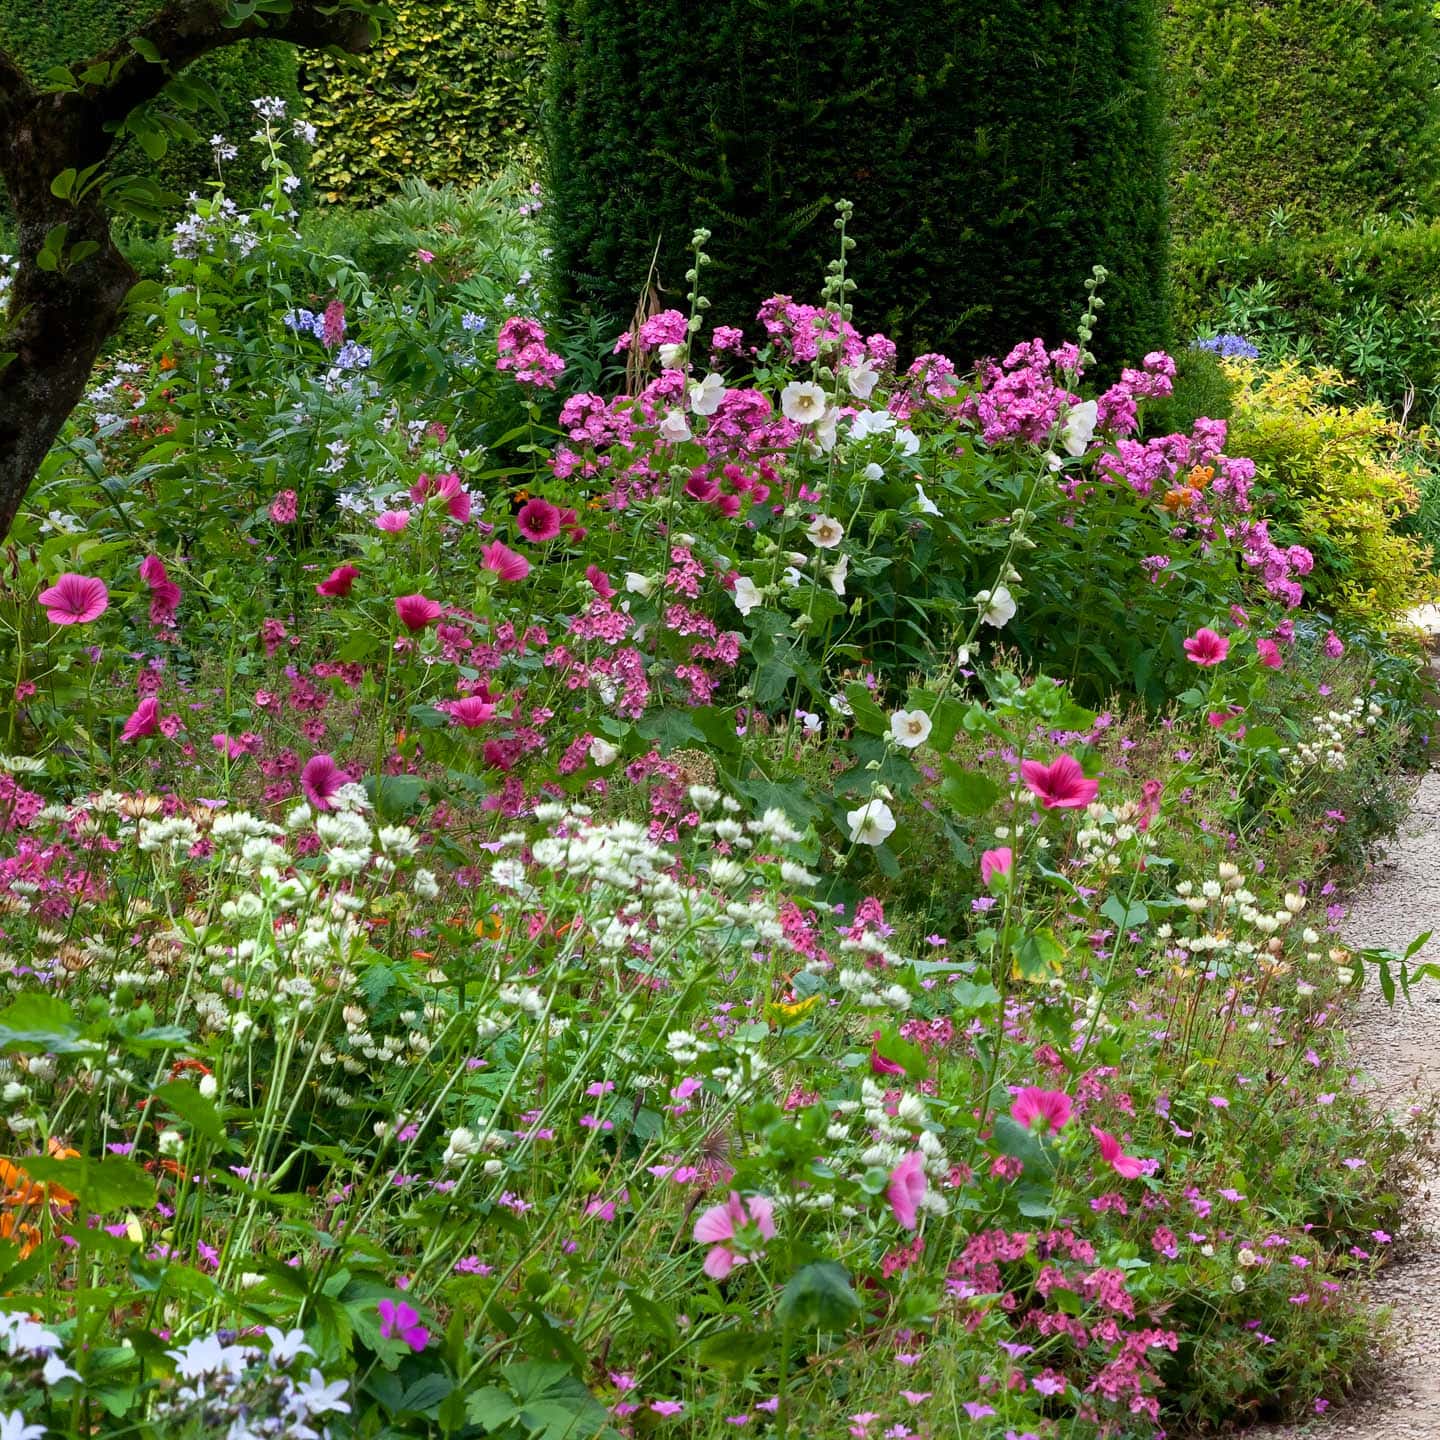 hollyhocks, daisies and other colorful flowers in a modern cottage garden